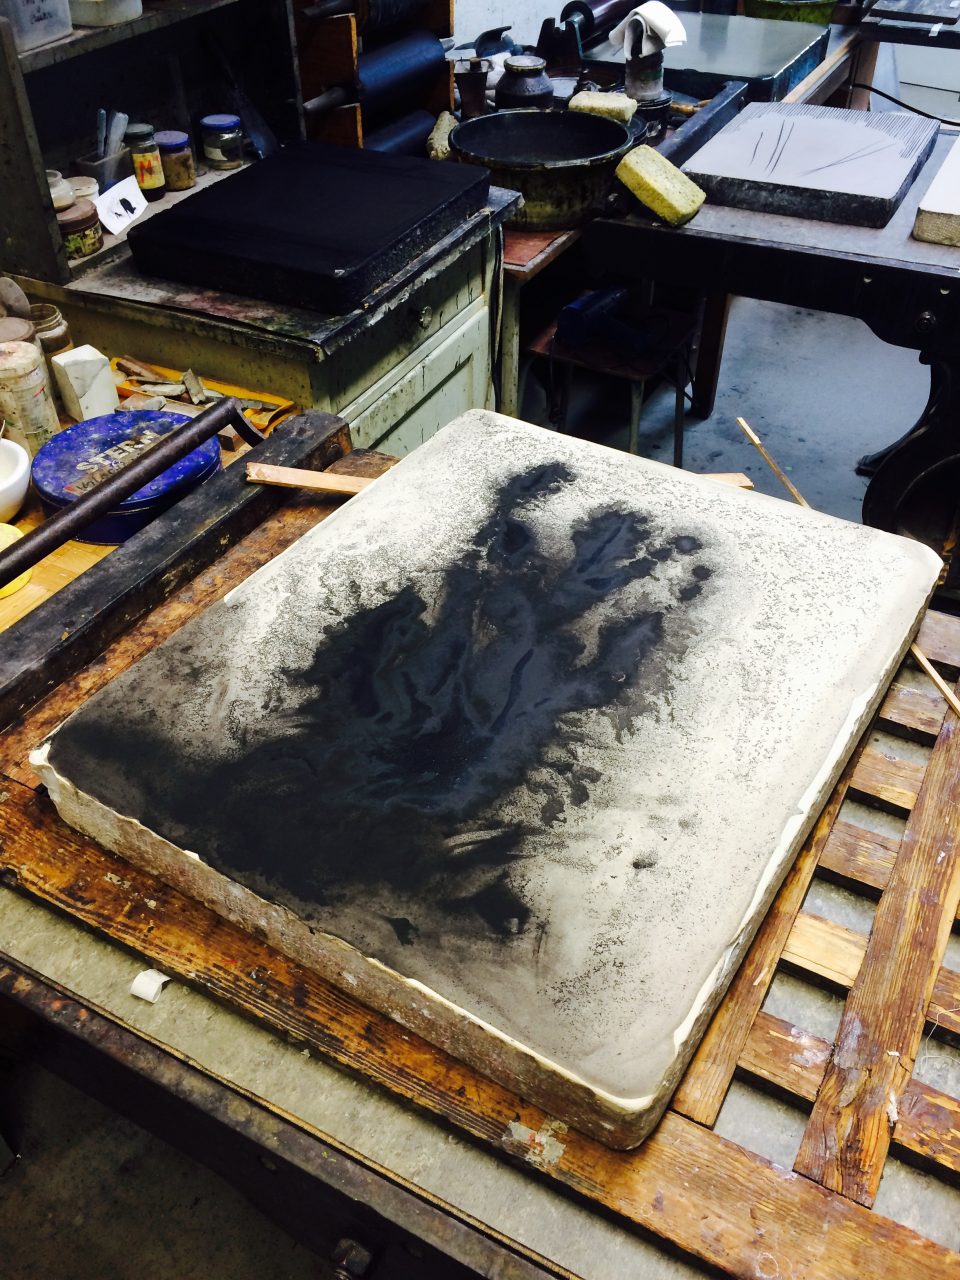 lithography